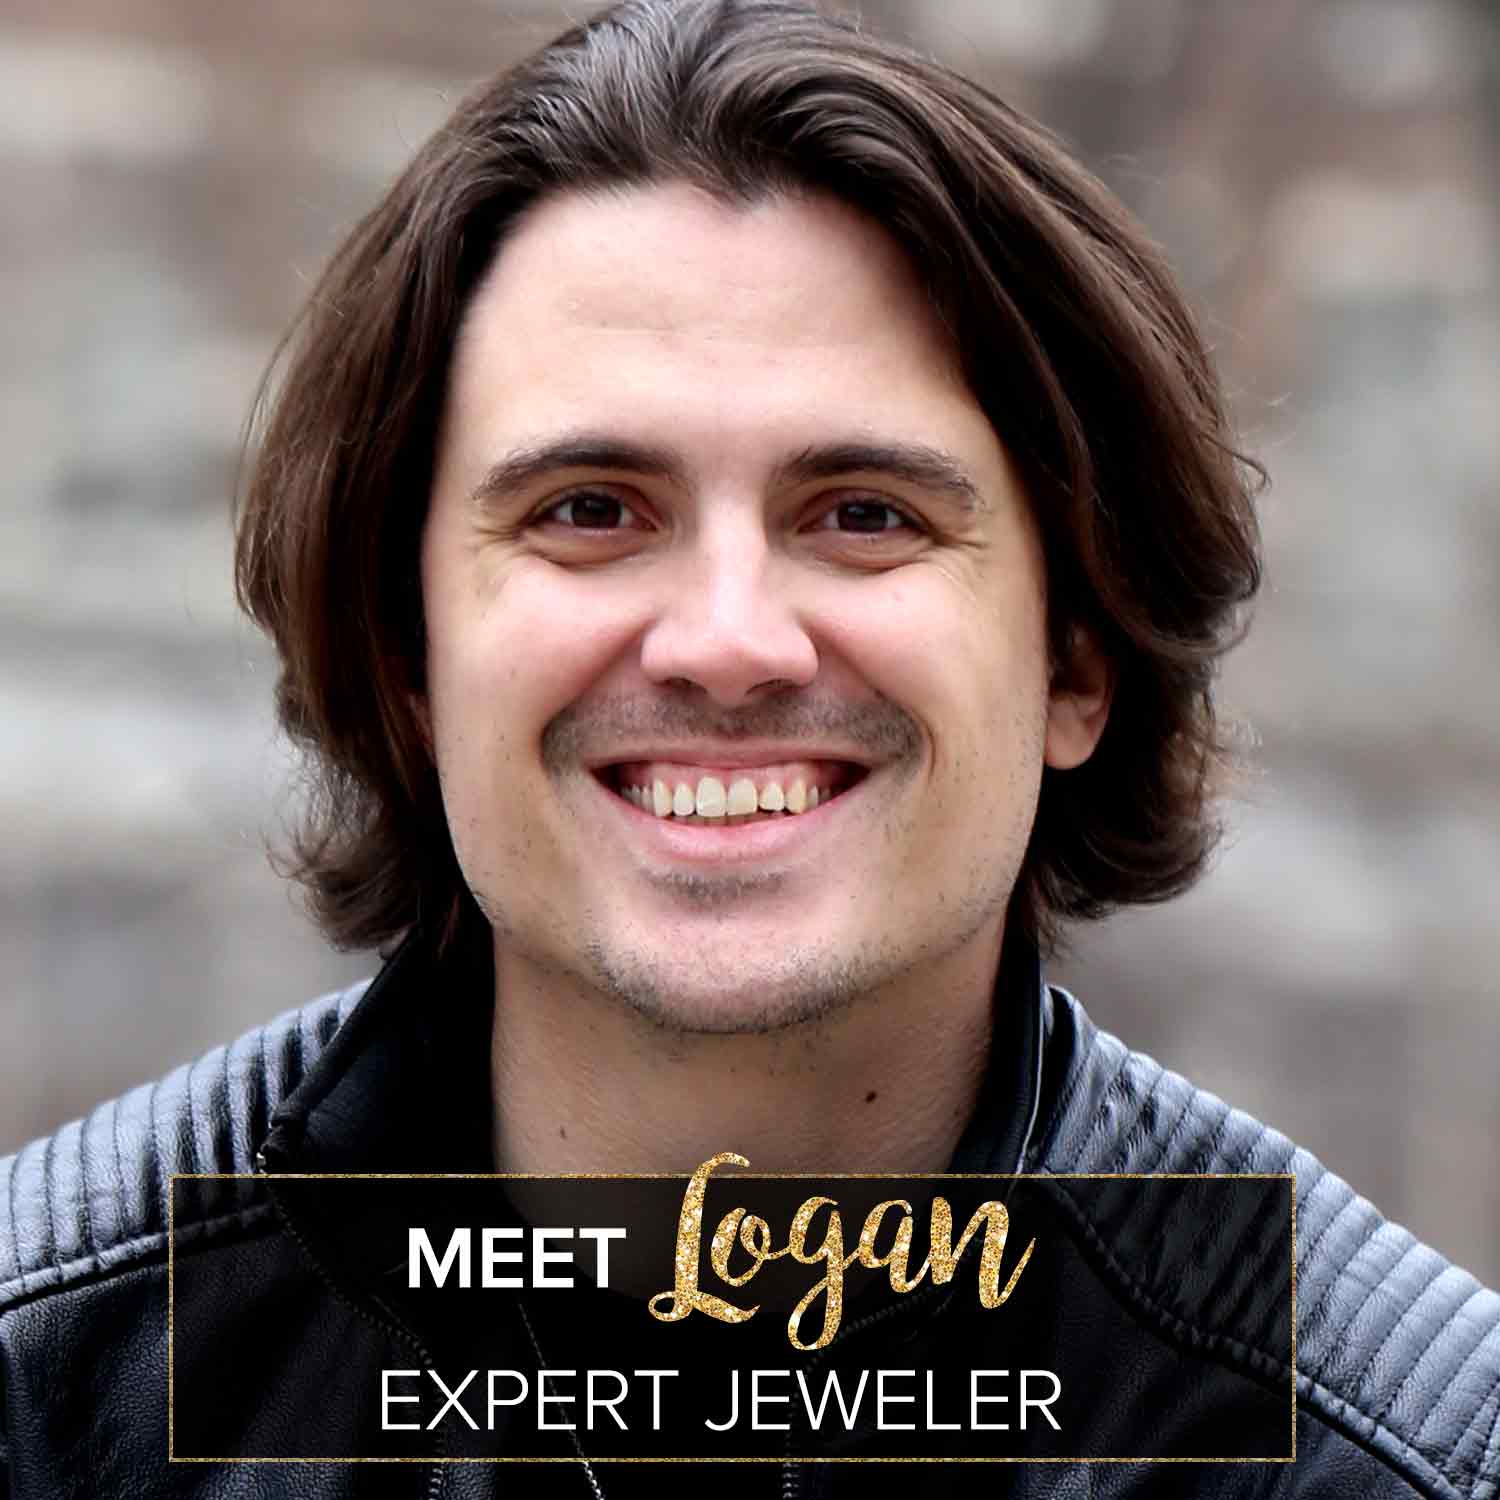 A picture of our expert jeweler, Logan.